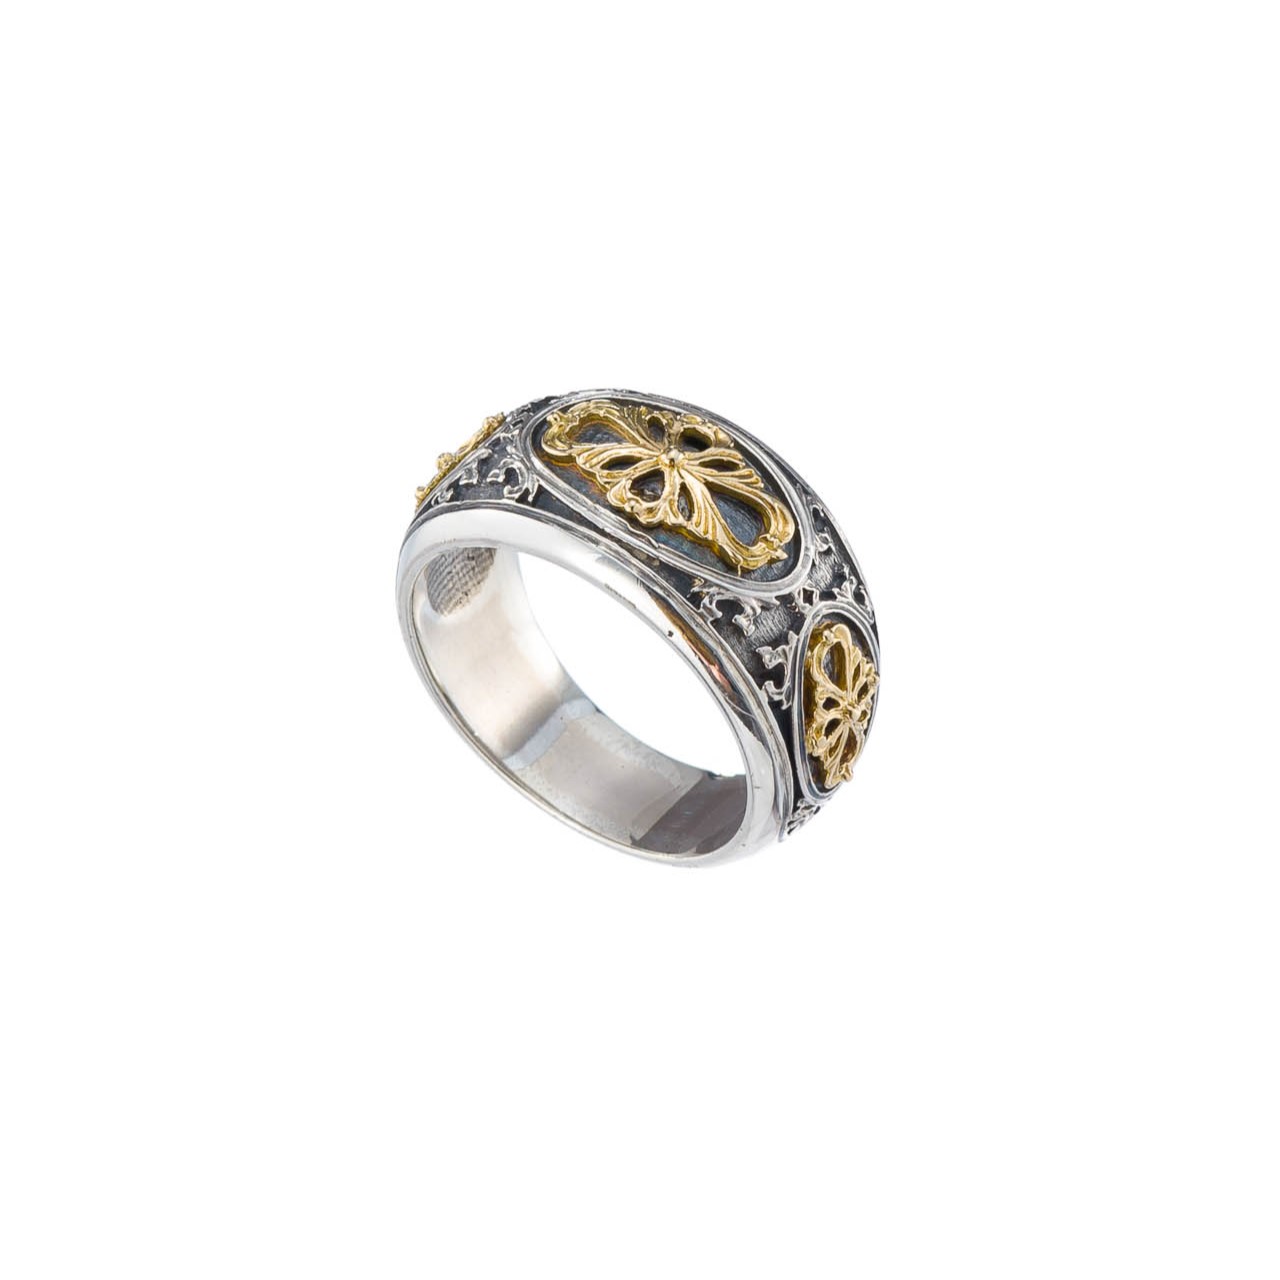 Garden Shadows band ring in 18K Gold and Sterling Silver